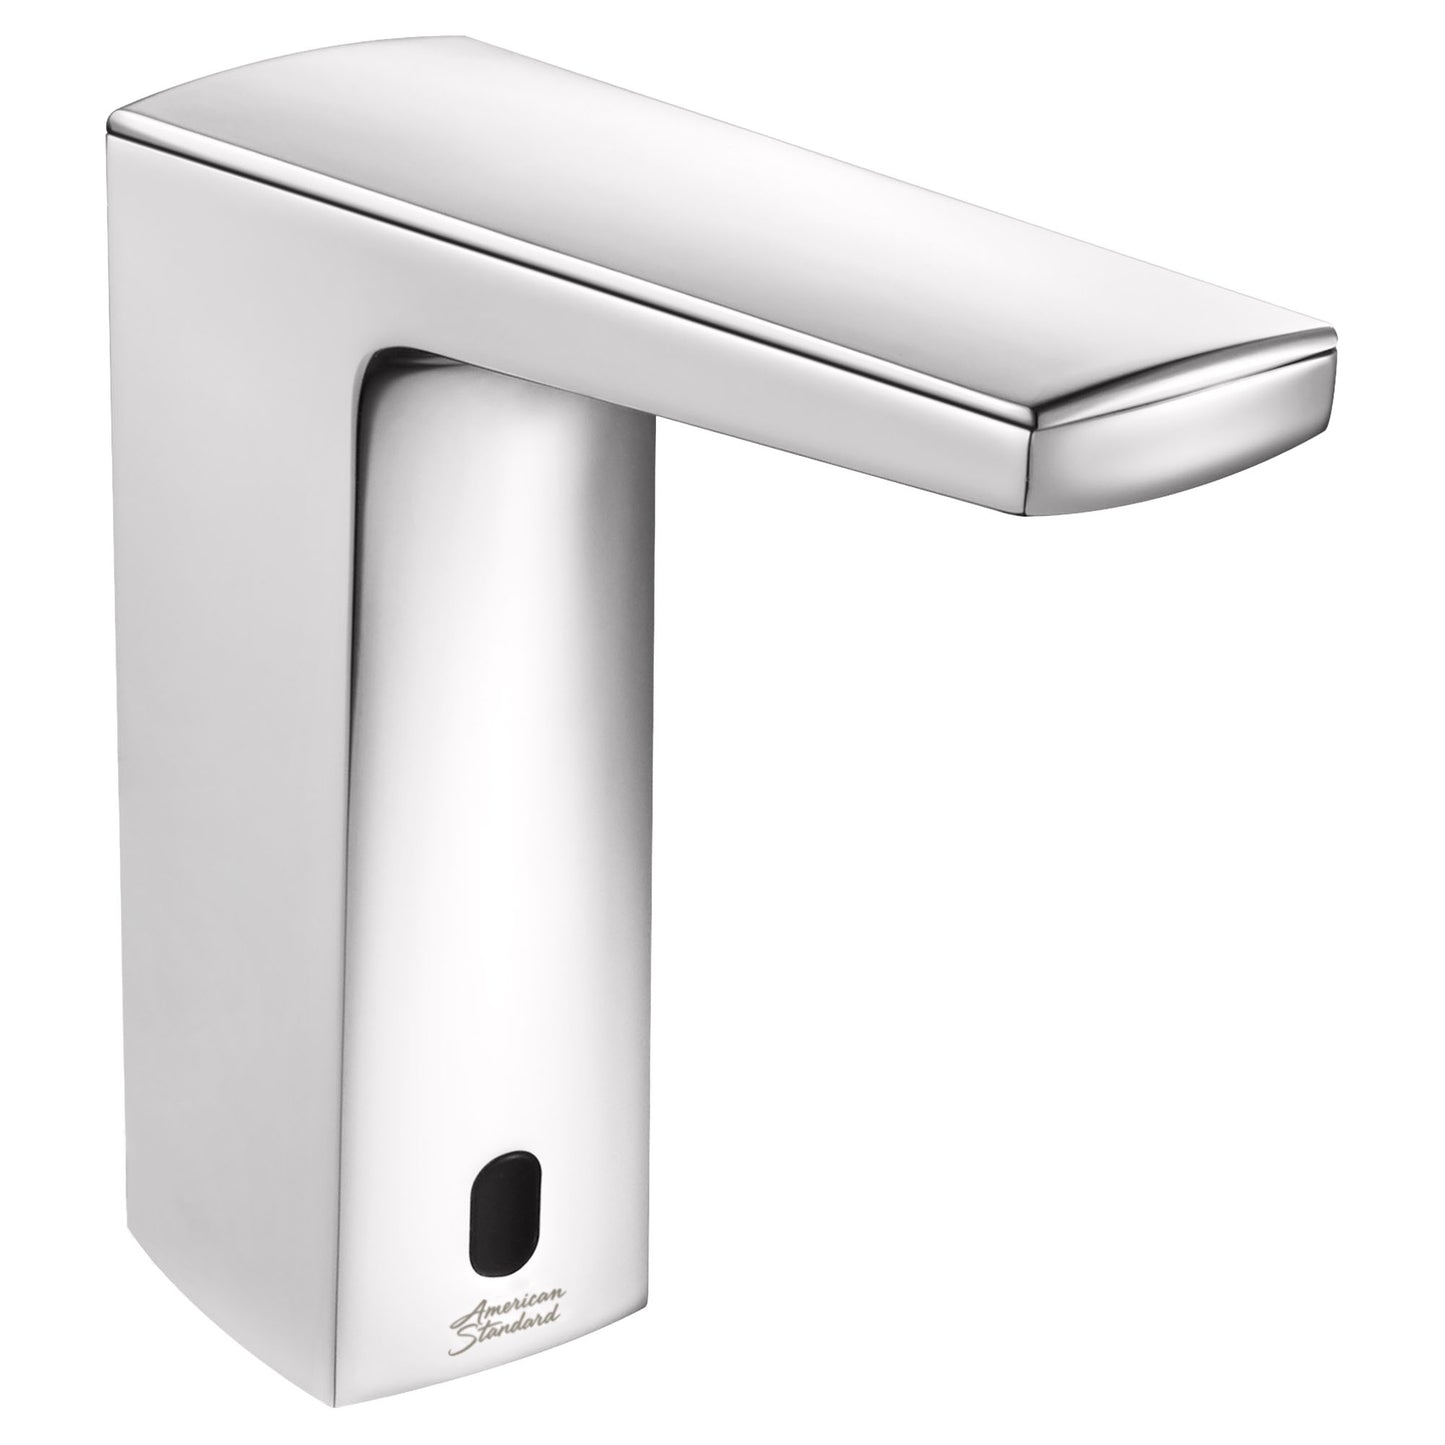 AMERICAN-STANDARD 702B105.002, Paradigm Selectronic Touchless Faucet, Base Model, 0.5 gpm/1.9 Lpm in Chrome